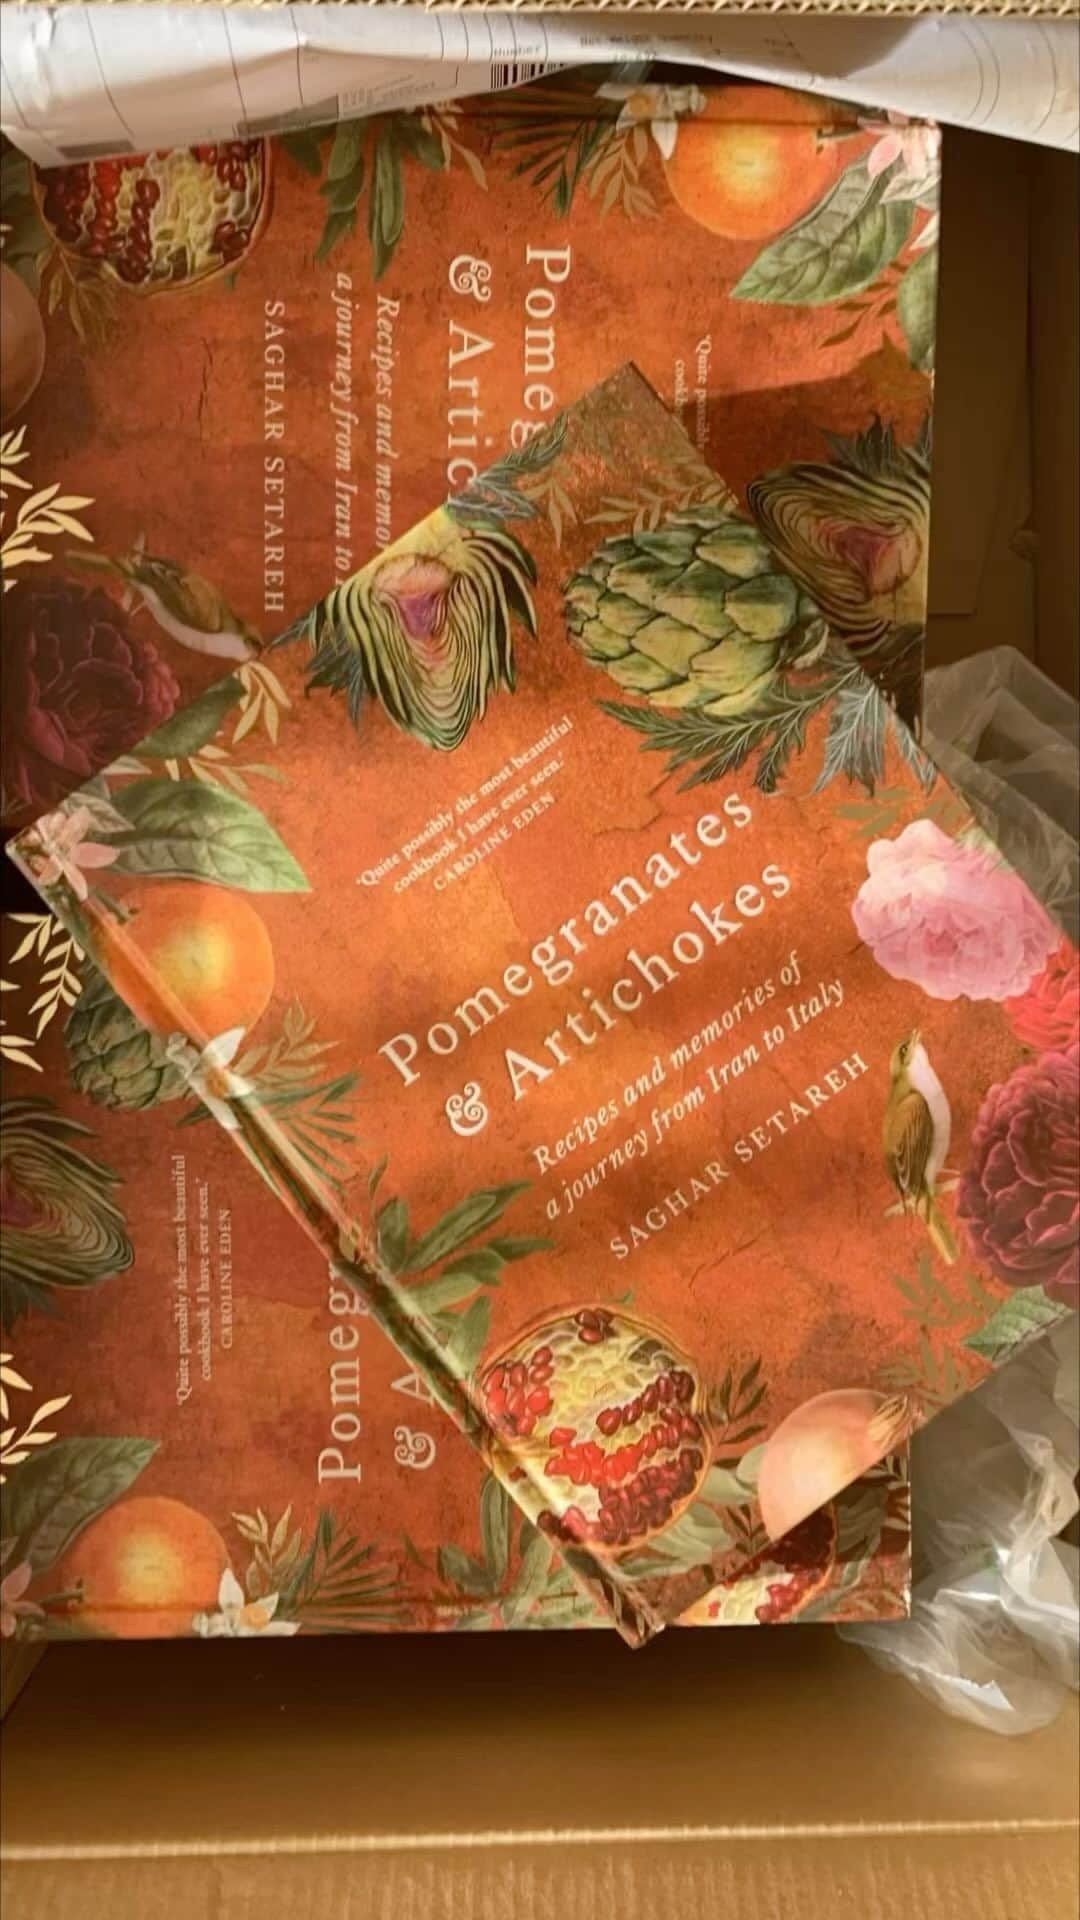 Saghar Setarehのインスタグラム：「My copies of #PomegranatesAndArtichokes have arrived!  Publication day is less than a week away and I am starting to feel a little sick in my stomach from excitement, joy and a bit panic. My baby's leaving my head (computer) and going out to the world! Go far and wide little baby book.  P.S. there's another version of this song on my Pomegranates & Artichokes Spotify playlist. Have you listened to it yet? It's perfect to get in to mood and you can find it in the link in my bio.   #LabNoonCookbook #flavorsAndEncounters  @murdochbooks_uk  @interlinkbooks  @slowfoodeditore  @arsvivendiverlag」